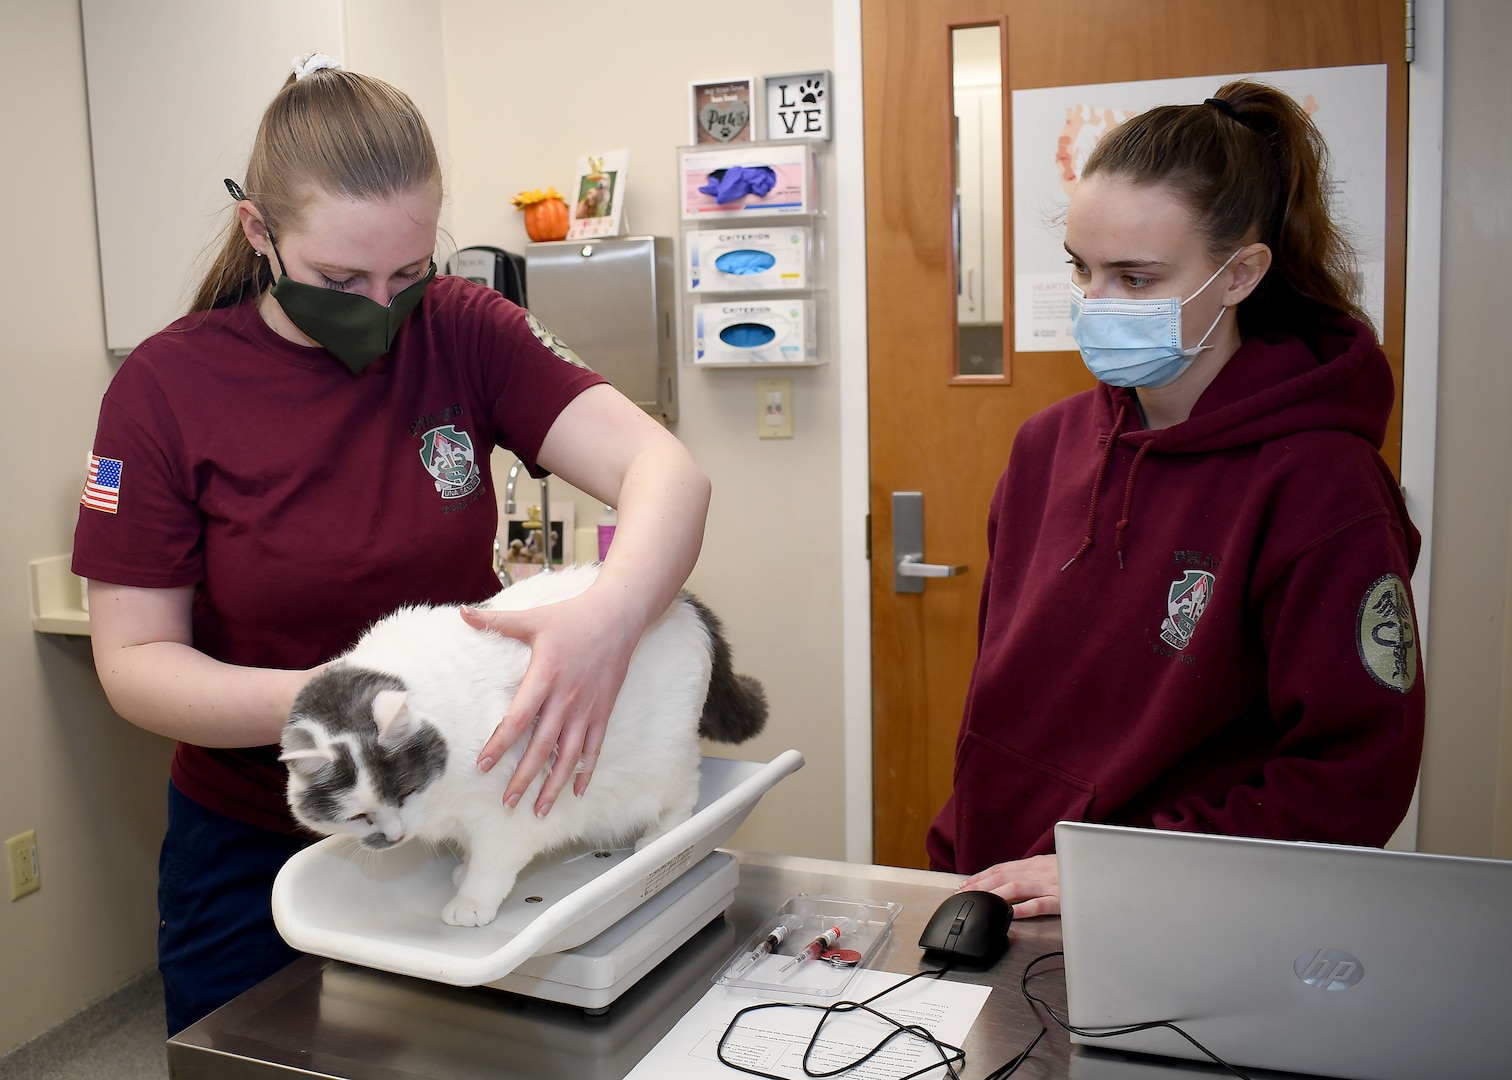 FORT DRUM, N.Y. –  Spc. Emily Rawn (left) and Pfc. Kenna Wildermuth (right), both animal care specialists with the Fort Drum Veterinary Treatment Facility, conduct a wellness check on a cat during the Fort Drum Veterinary Treatment Facility drive-up vaccine clinic on Fort Drum, N.Y., Dec. 28.  To have their pets seen, owners were able to simply drive up to the door, check in with the vet tech, and wait in their vehicle as their pets were cared for inside.